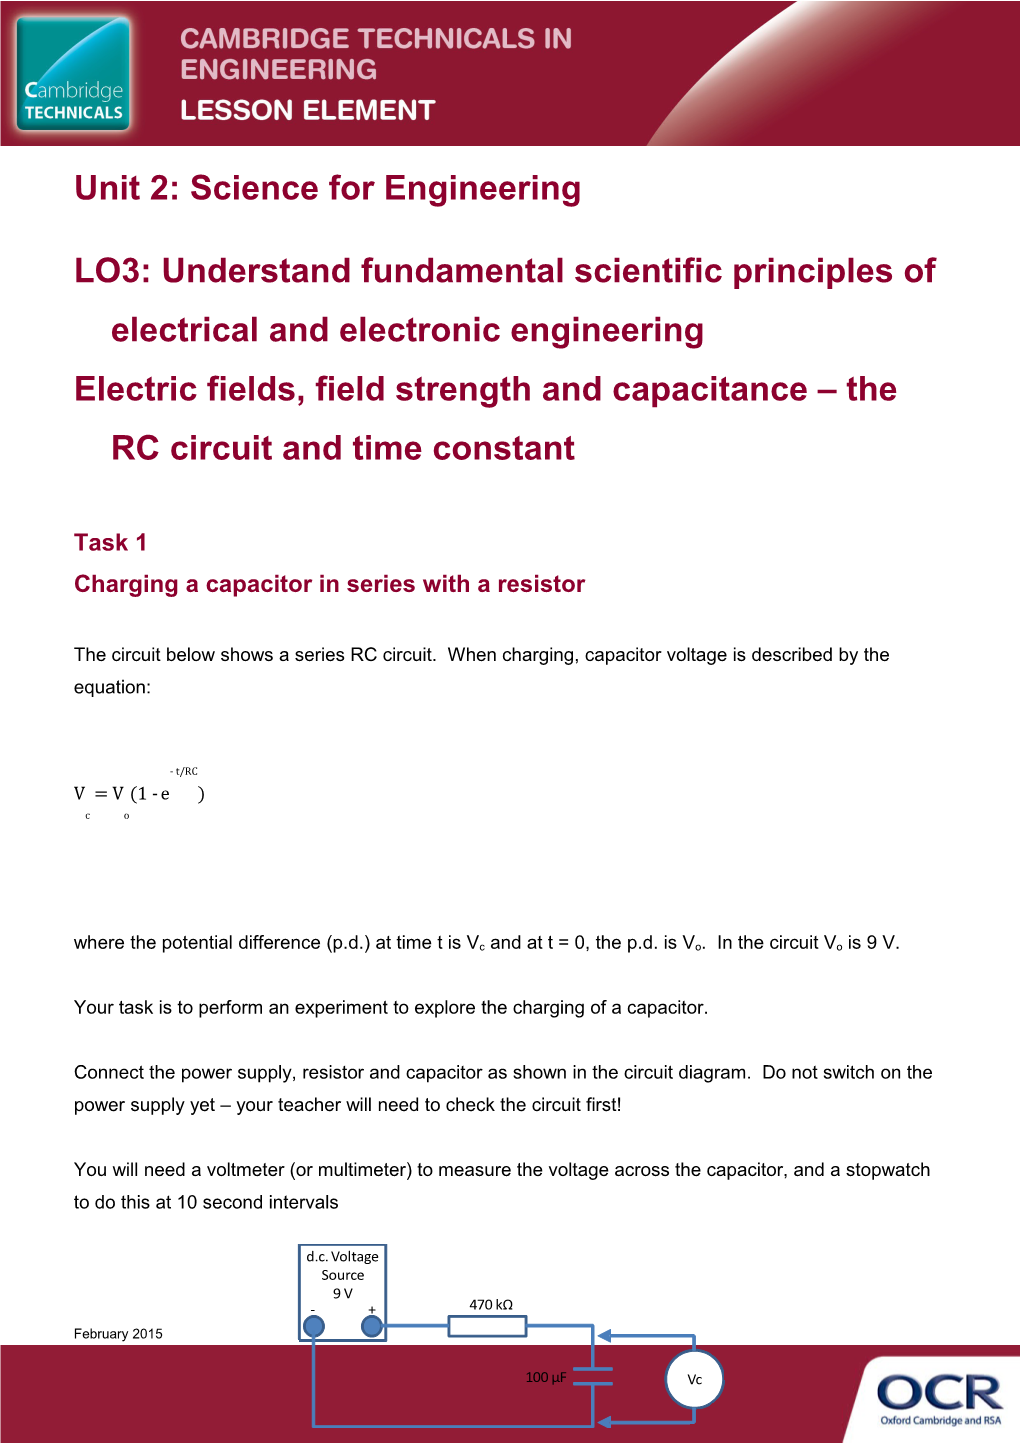 OCR Level 3 Cambridge Technicals in Engineering, Lesson Element - Electric Fields, Field